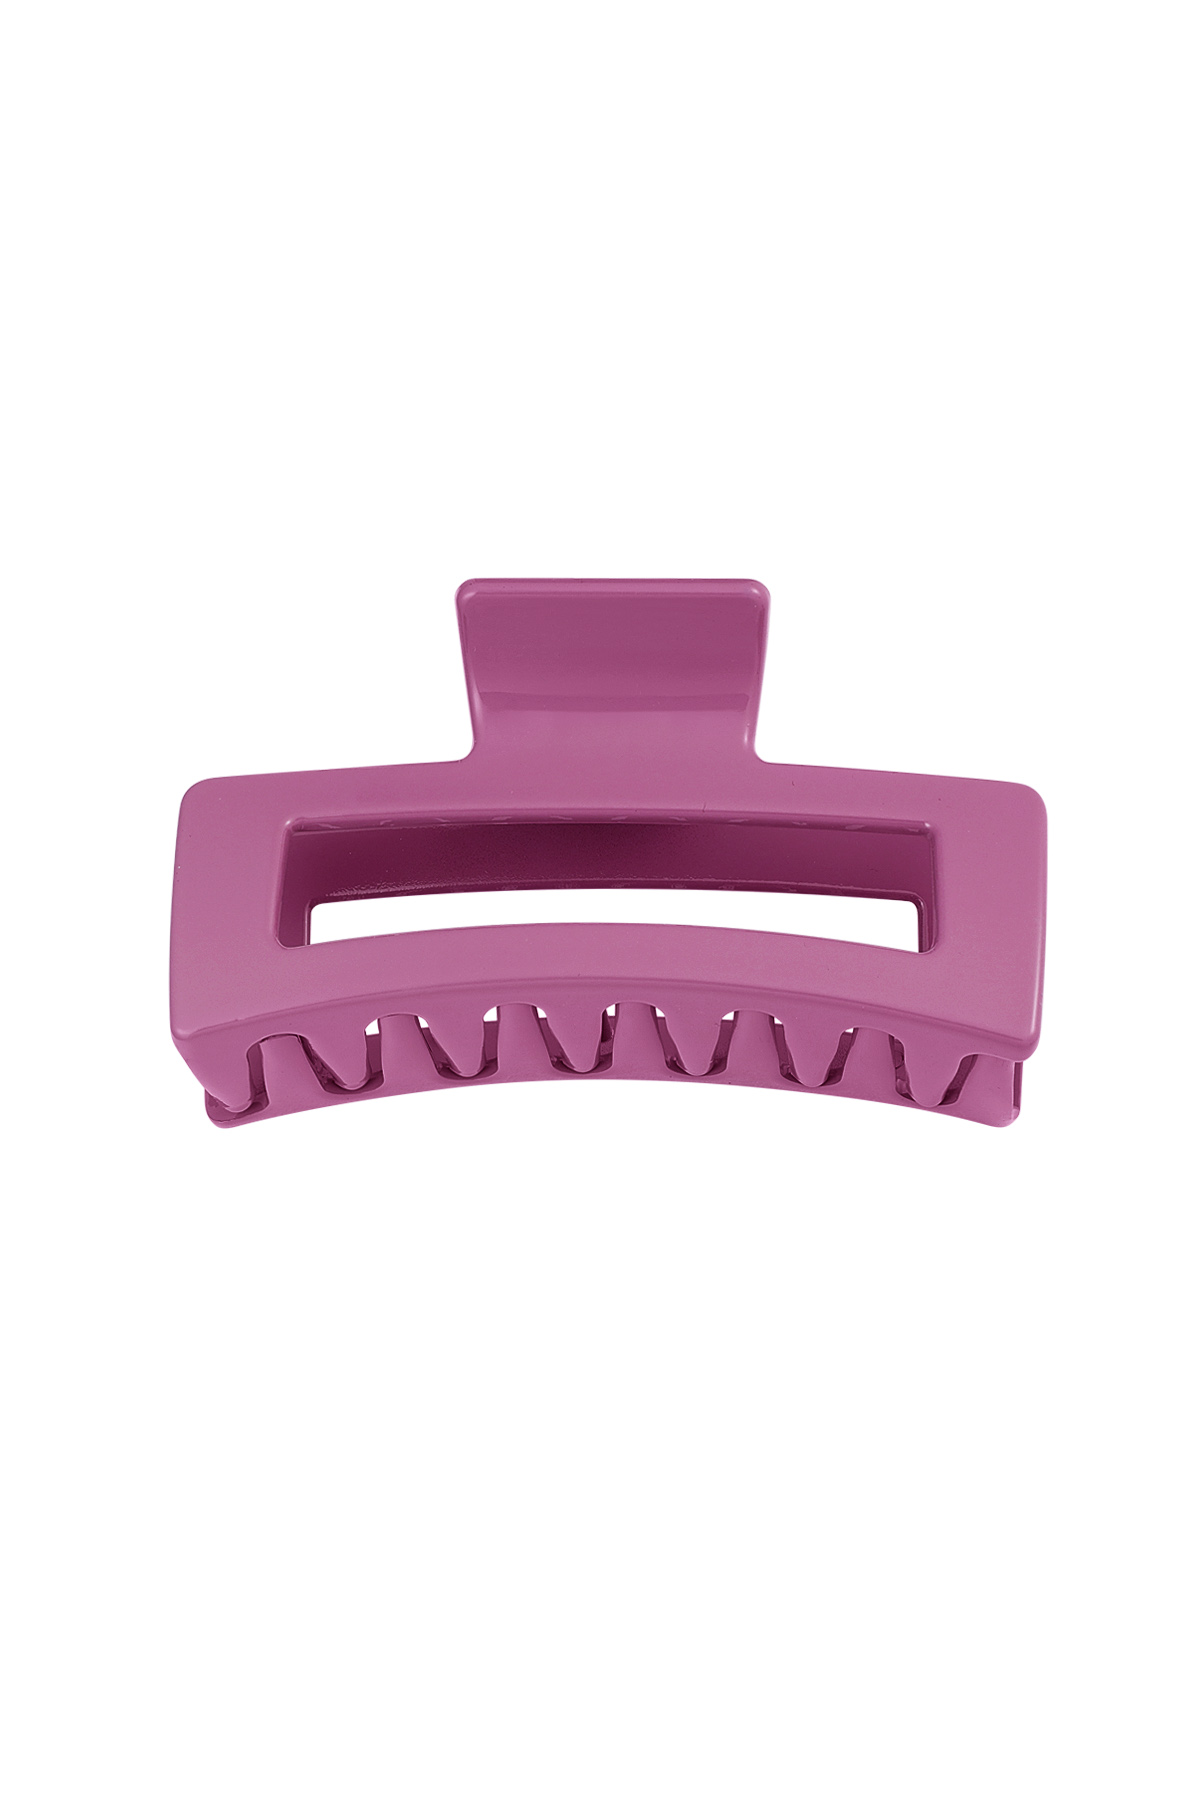 Hair clip rectangle - pink 